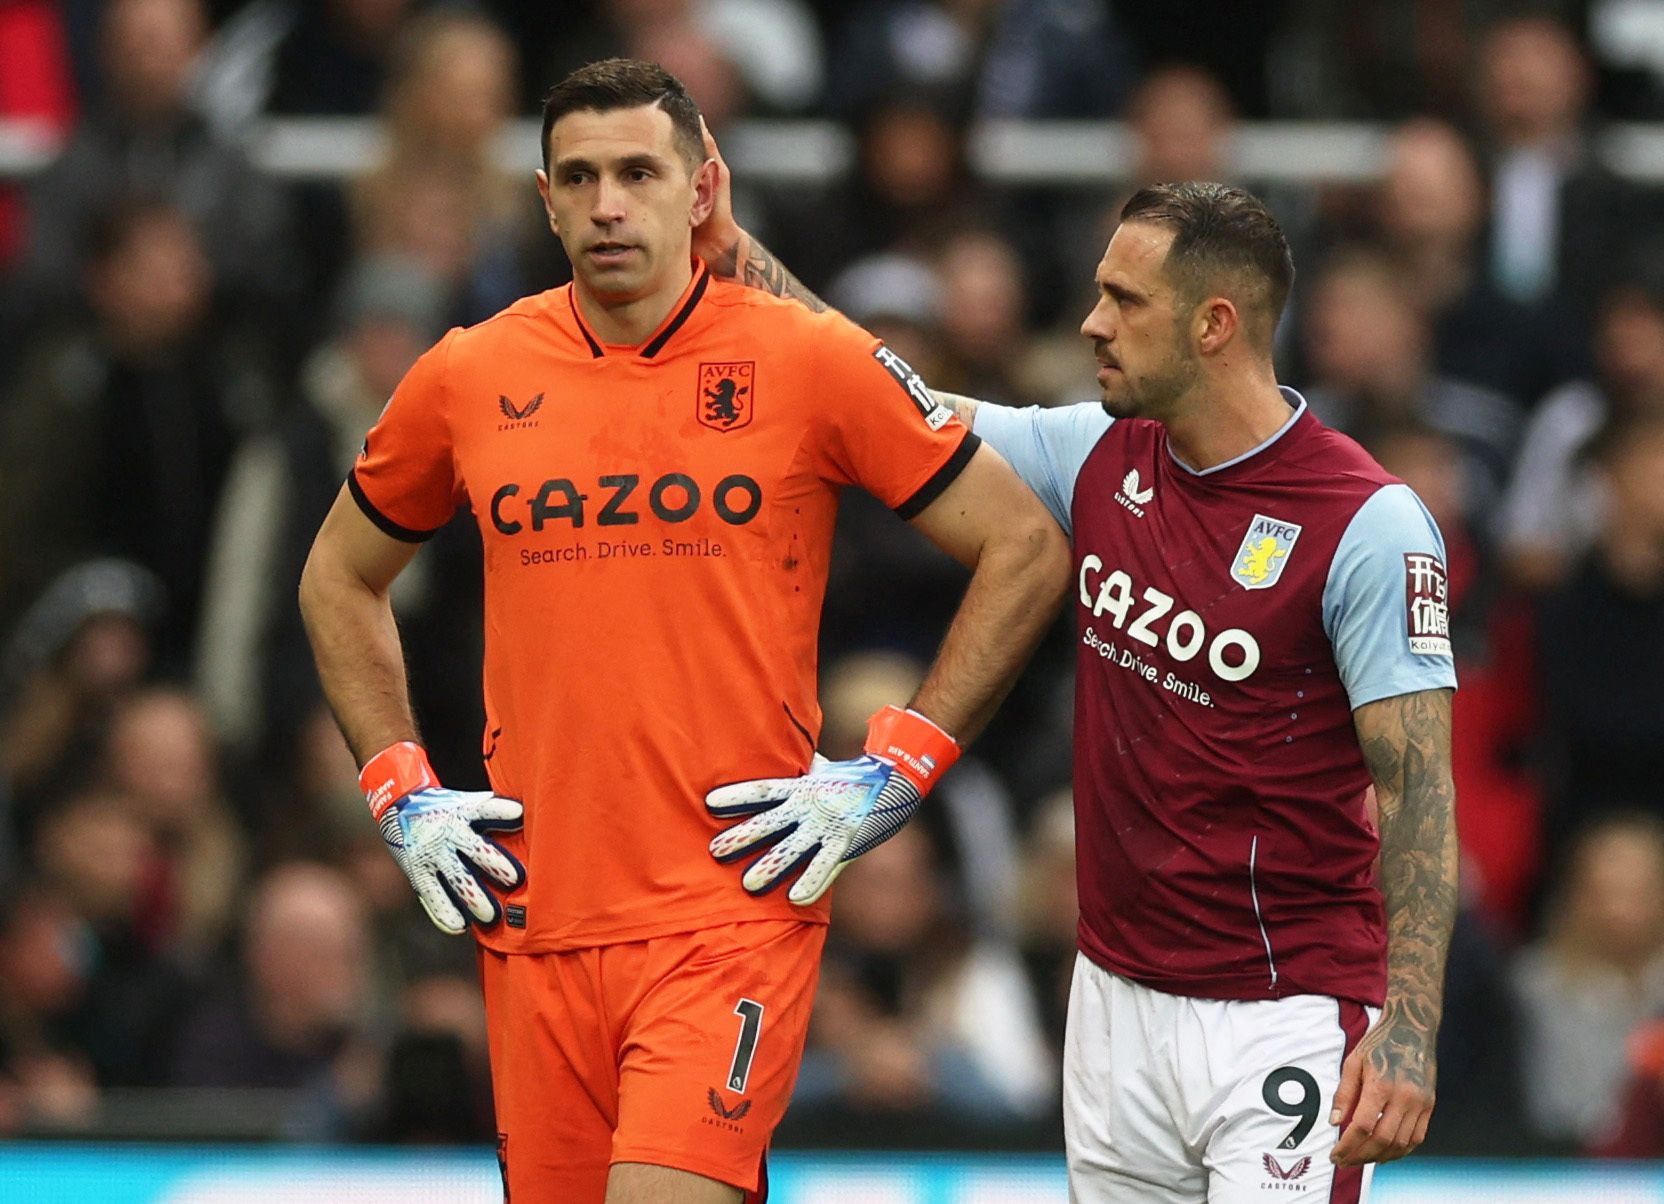 Soccer Football - Premier League - Newcastle United v Aston Villa - St James' Park, Newcastle, Britain - October 29, 2022 Aston Villa's Emiliano Martinez alongside teammate Danny Ings before being substituted due to injury Action Images via Reuters/Lee Smith EDITORIAL USE ONLY. No use with unauthorized audio, video, data, fixture lists, club/league logos or 'live' services. Online in-match use limited to 75 images, no video emulation. No use in betting, games or single club /league/player public